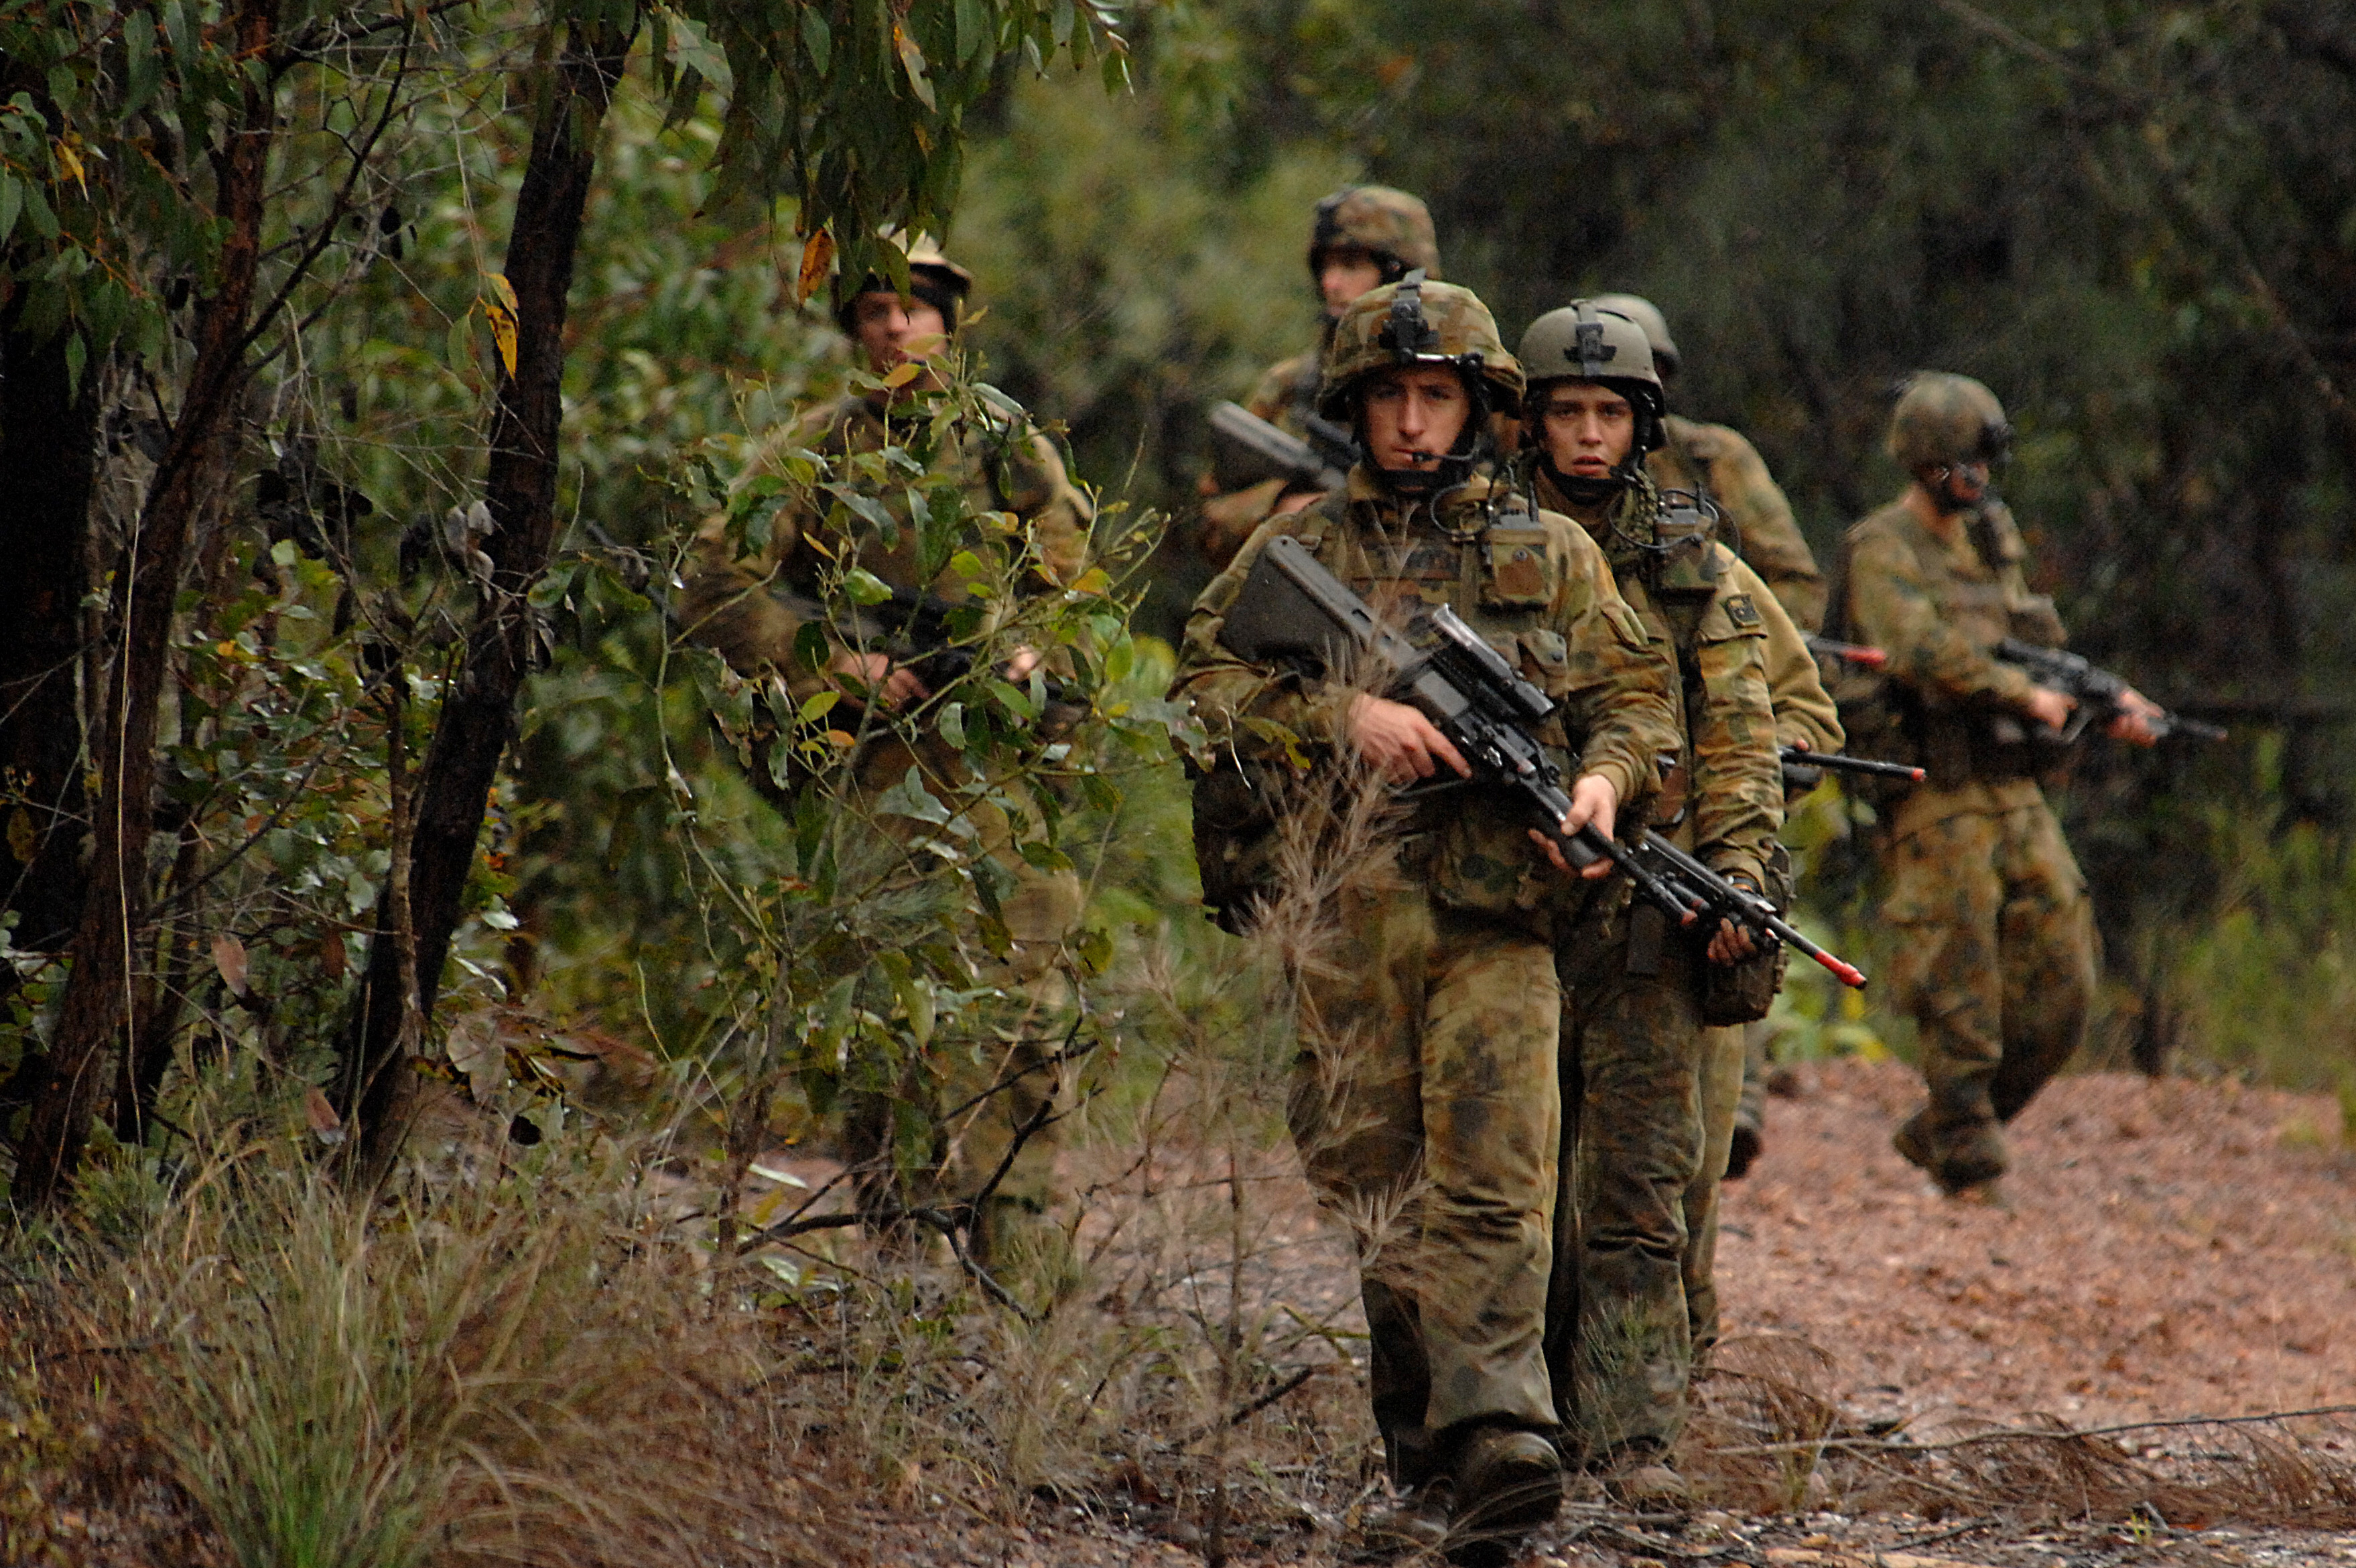 Australian_soldiers_from_the_2nd_Battalion,_Royal_Australian_Regiment_conducts_a_foot_patrol_during_exercise_Talisman_Sabre_2007.jpg